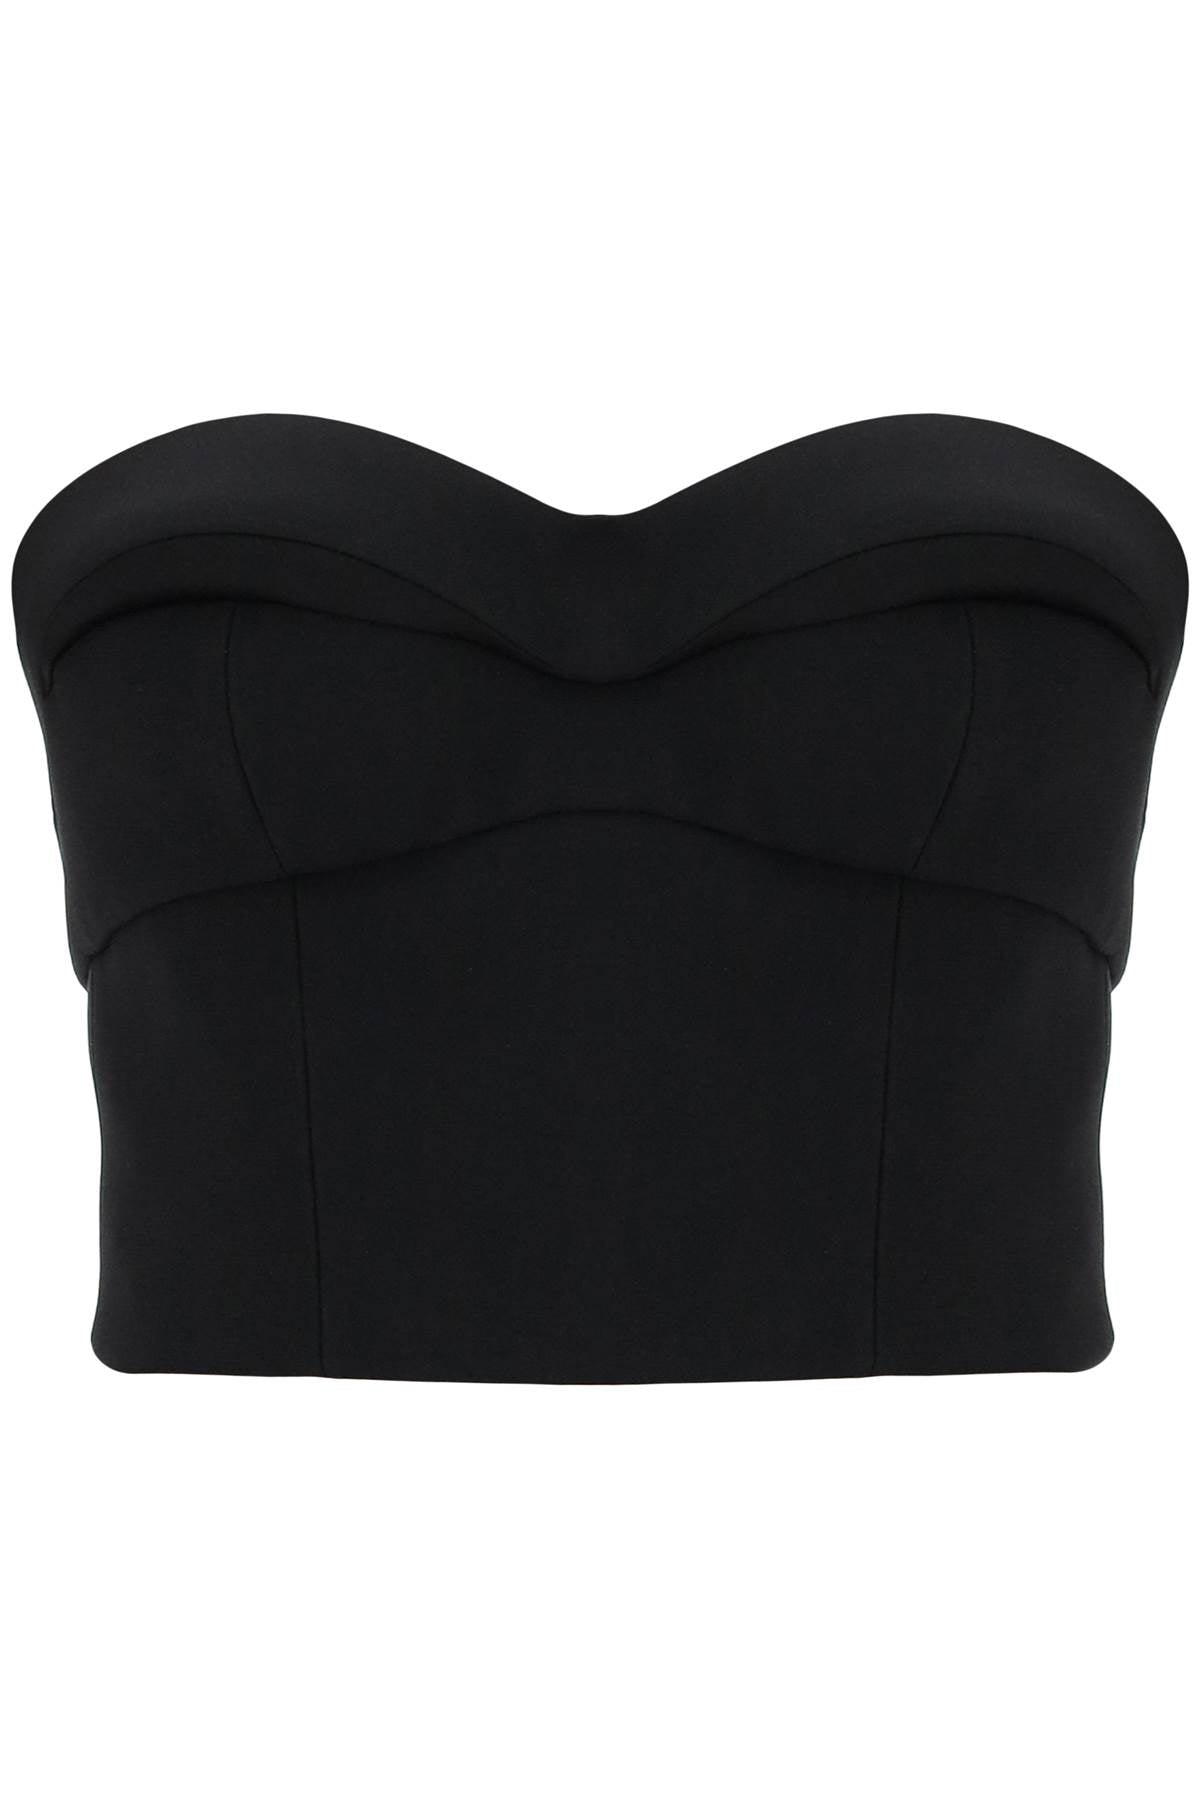 Versace padded cup bustier top with 1014822 1A10346 BLACK